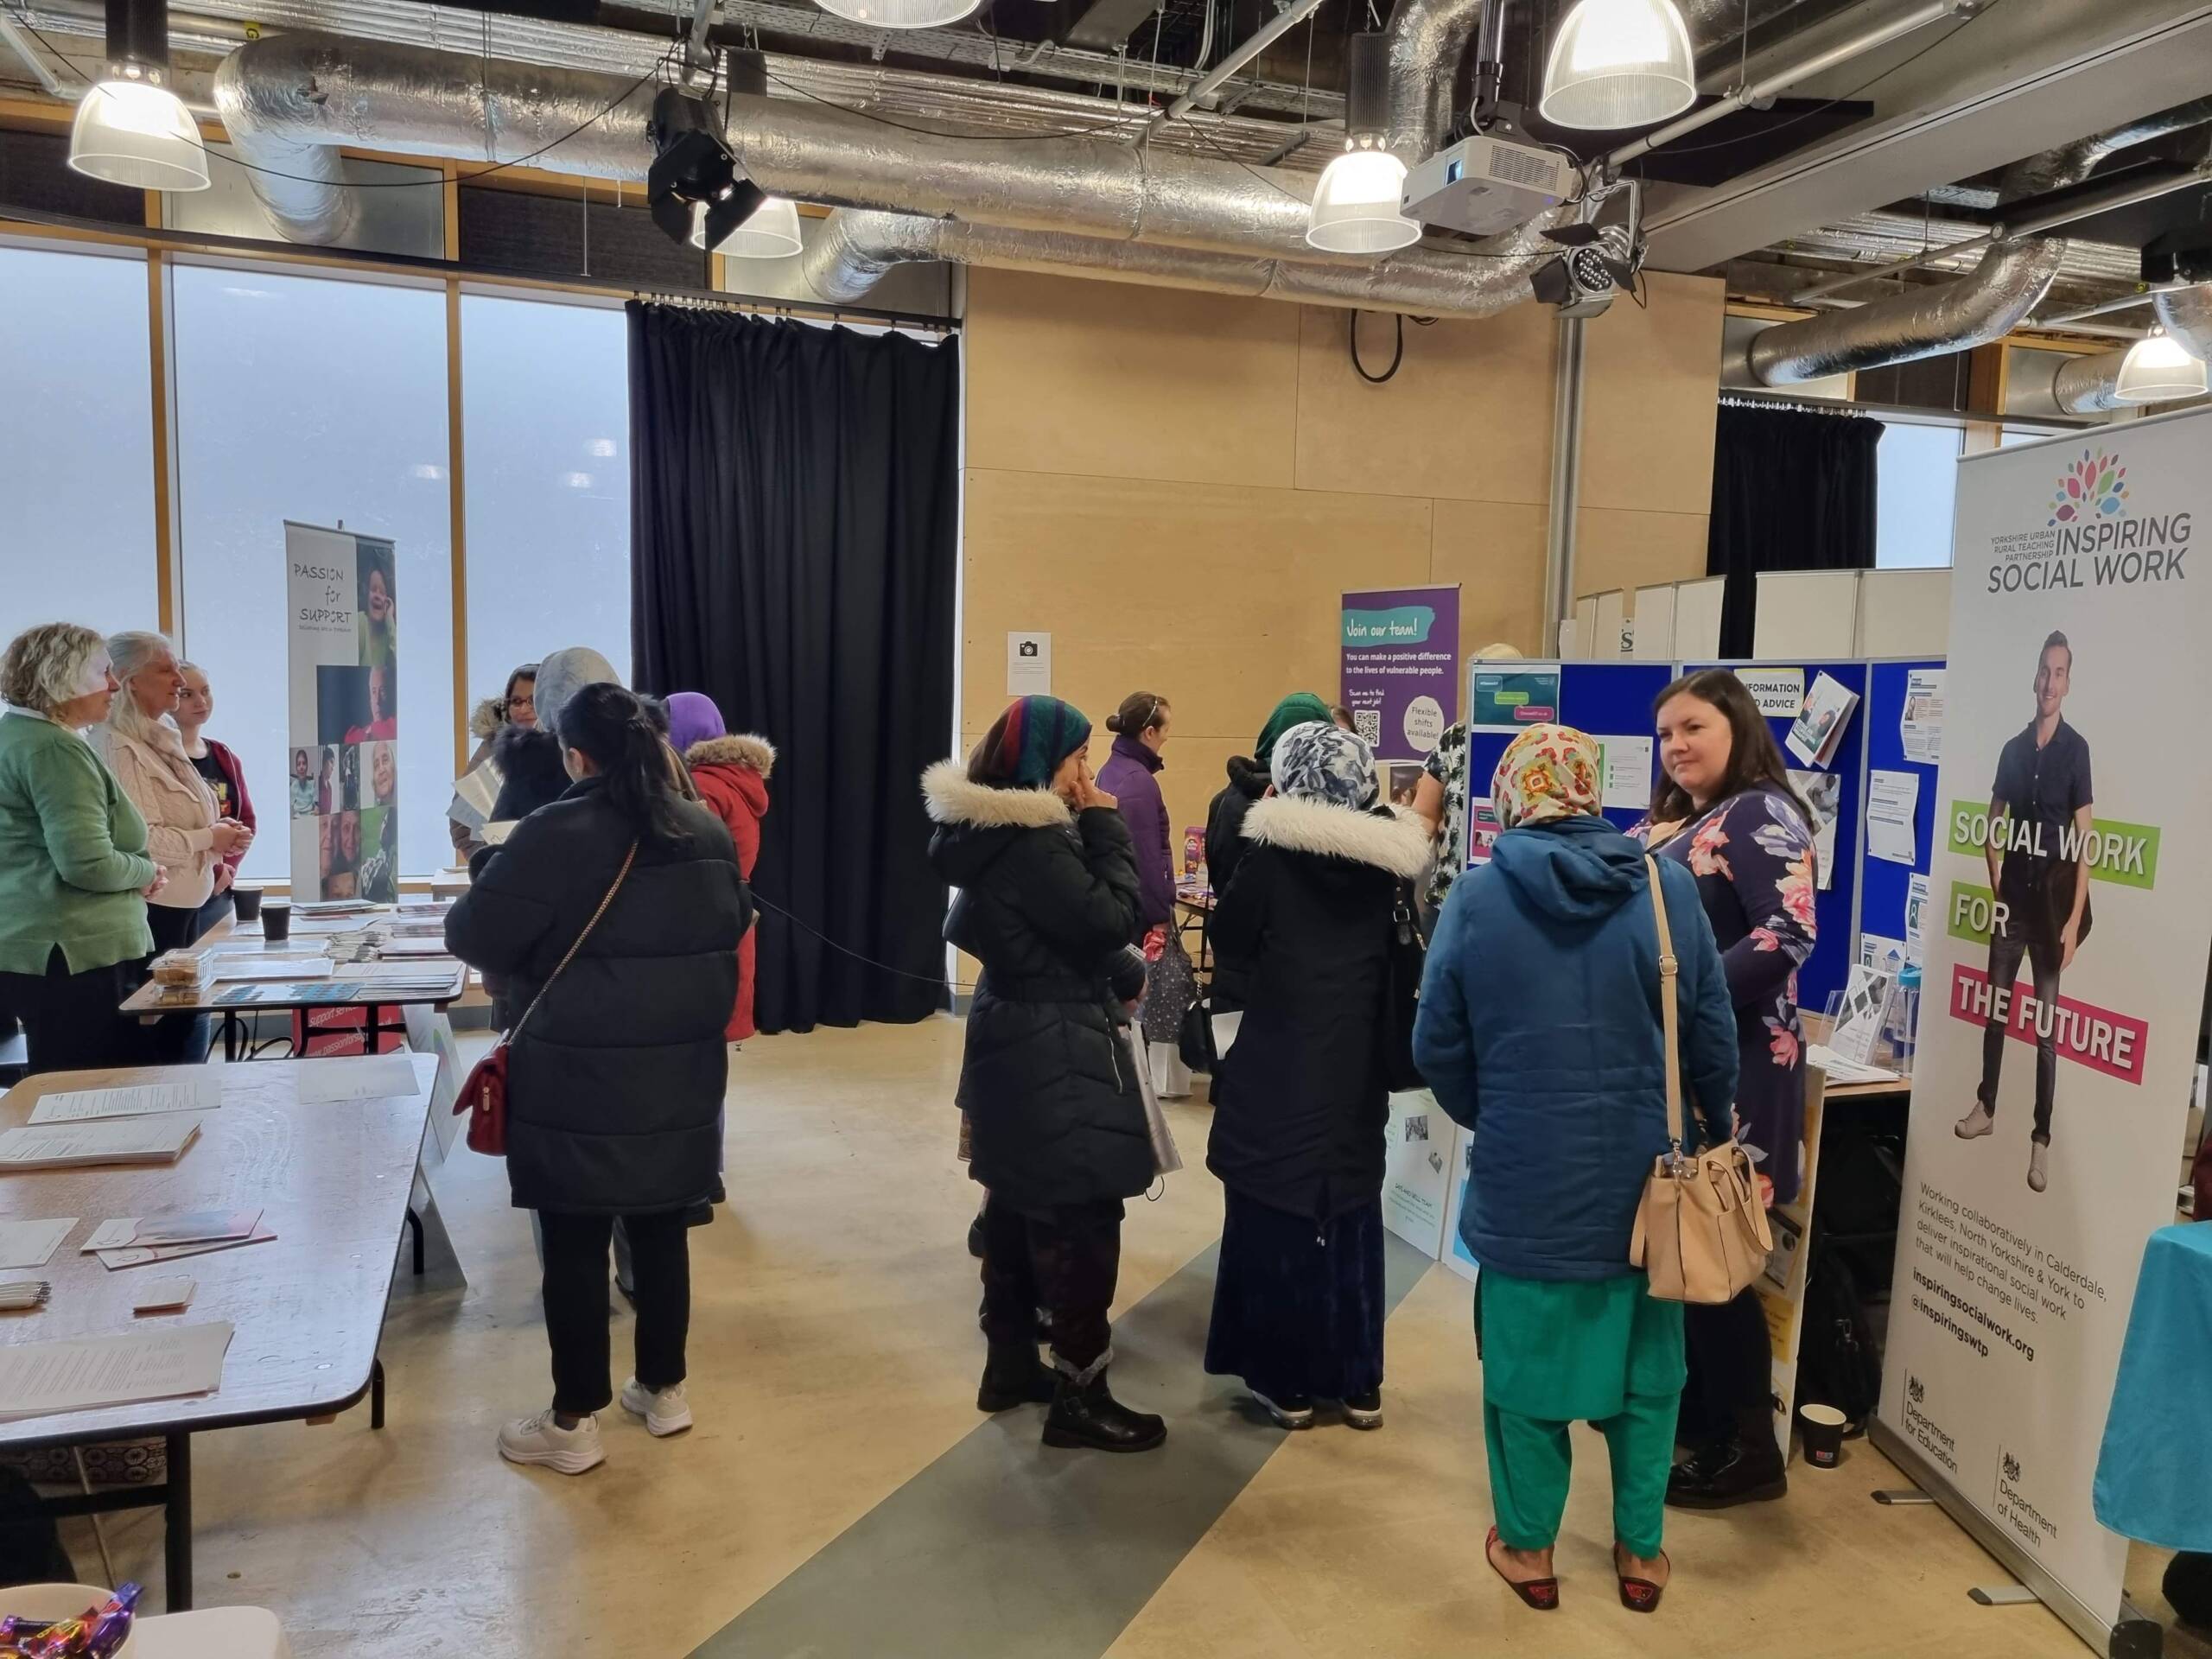 People at the Halifax care careers event